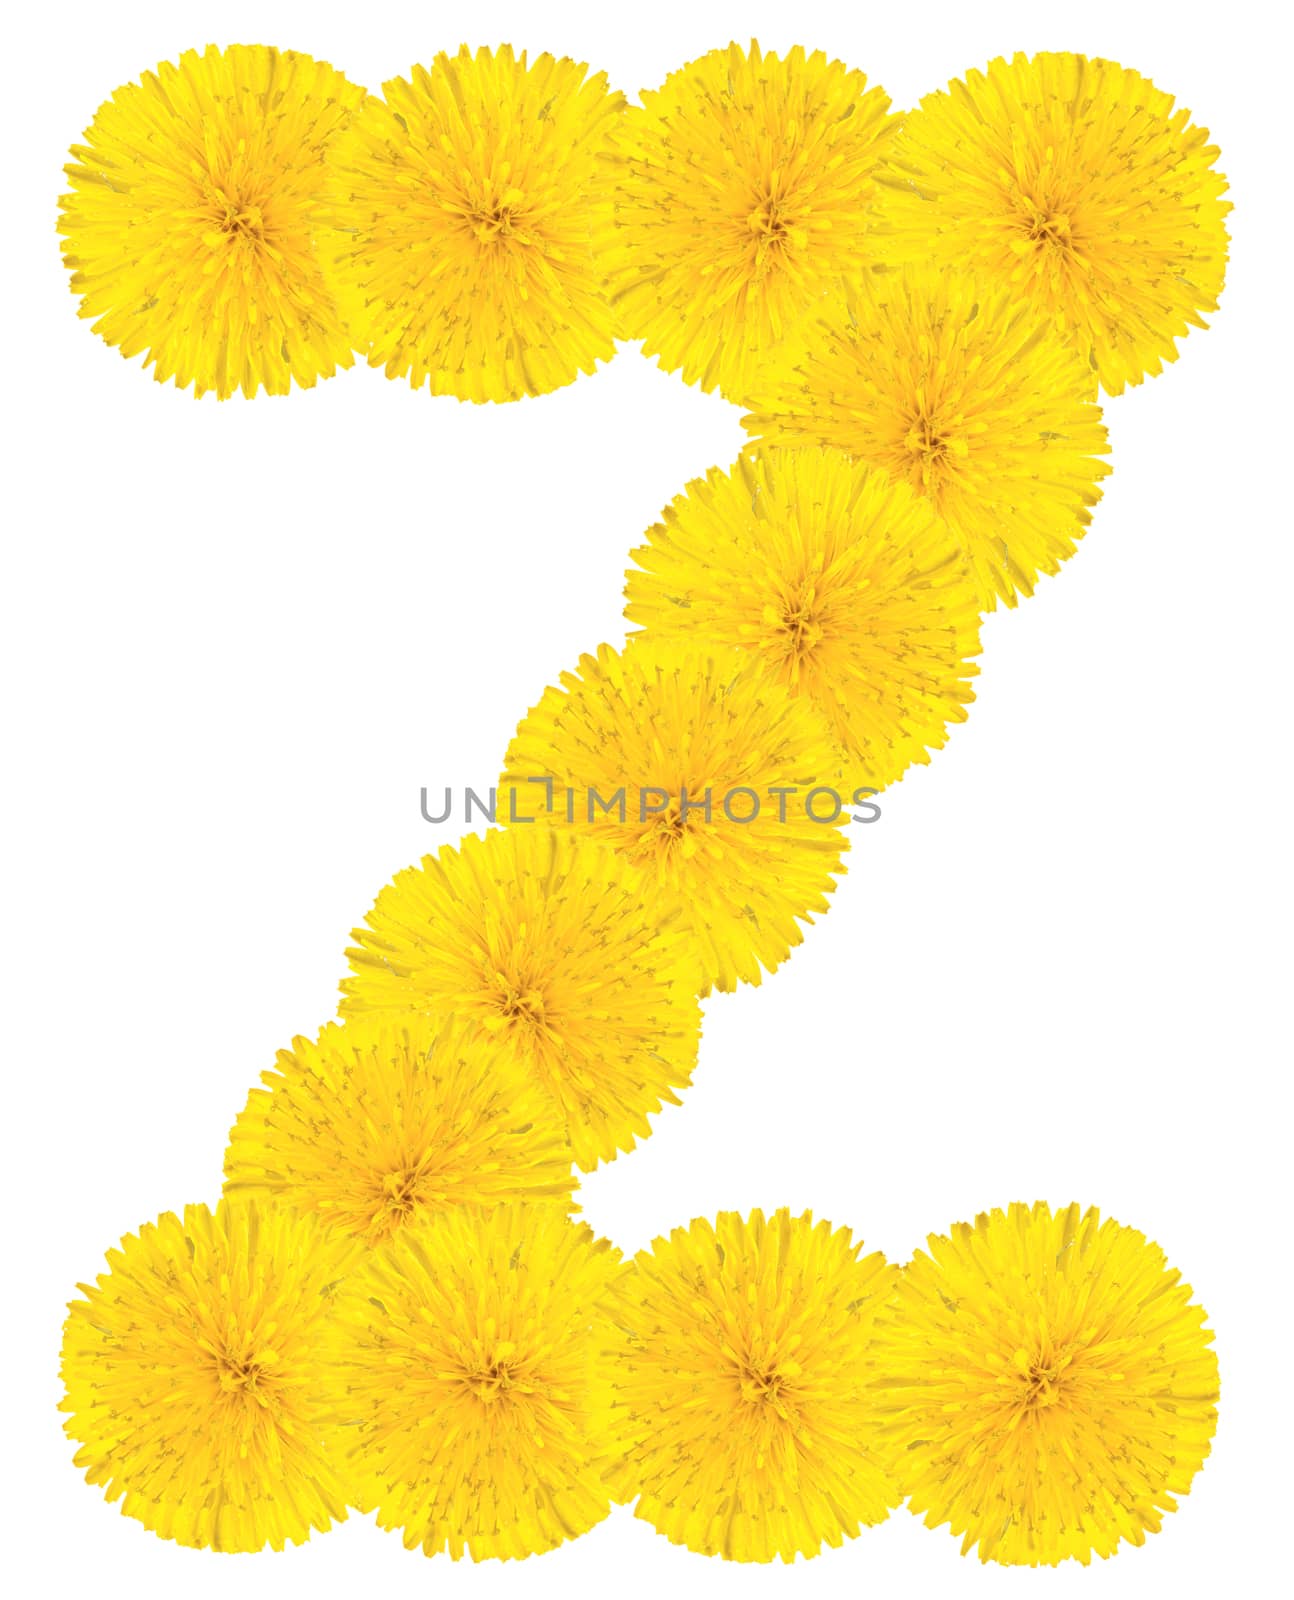 Letter Z made from dandelions by Valengilda